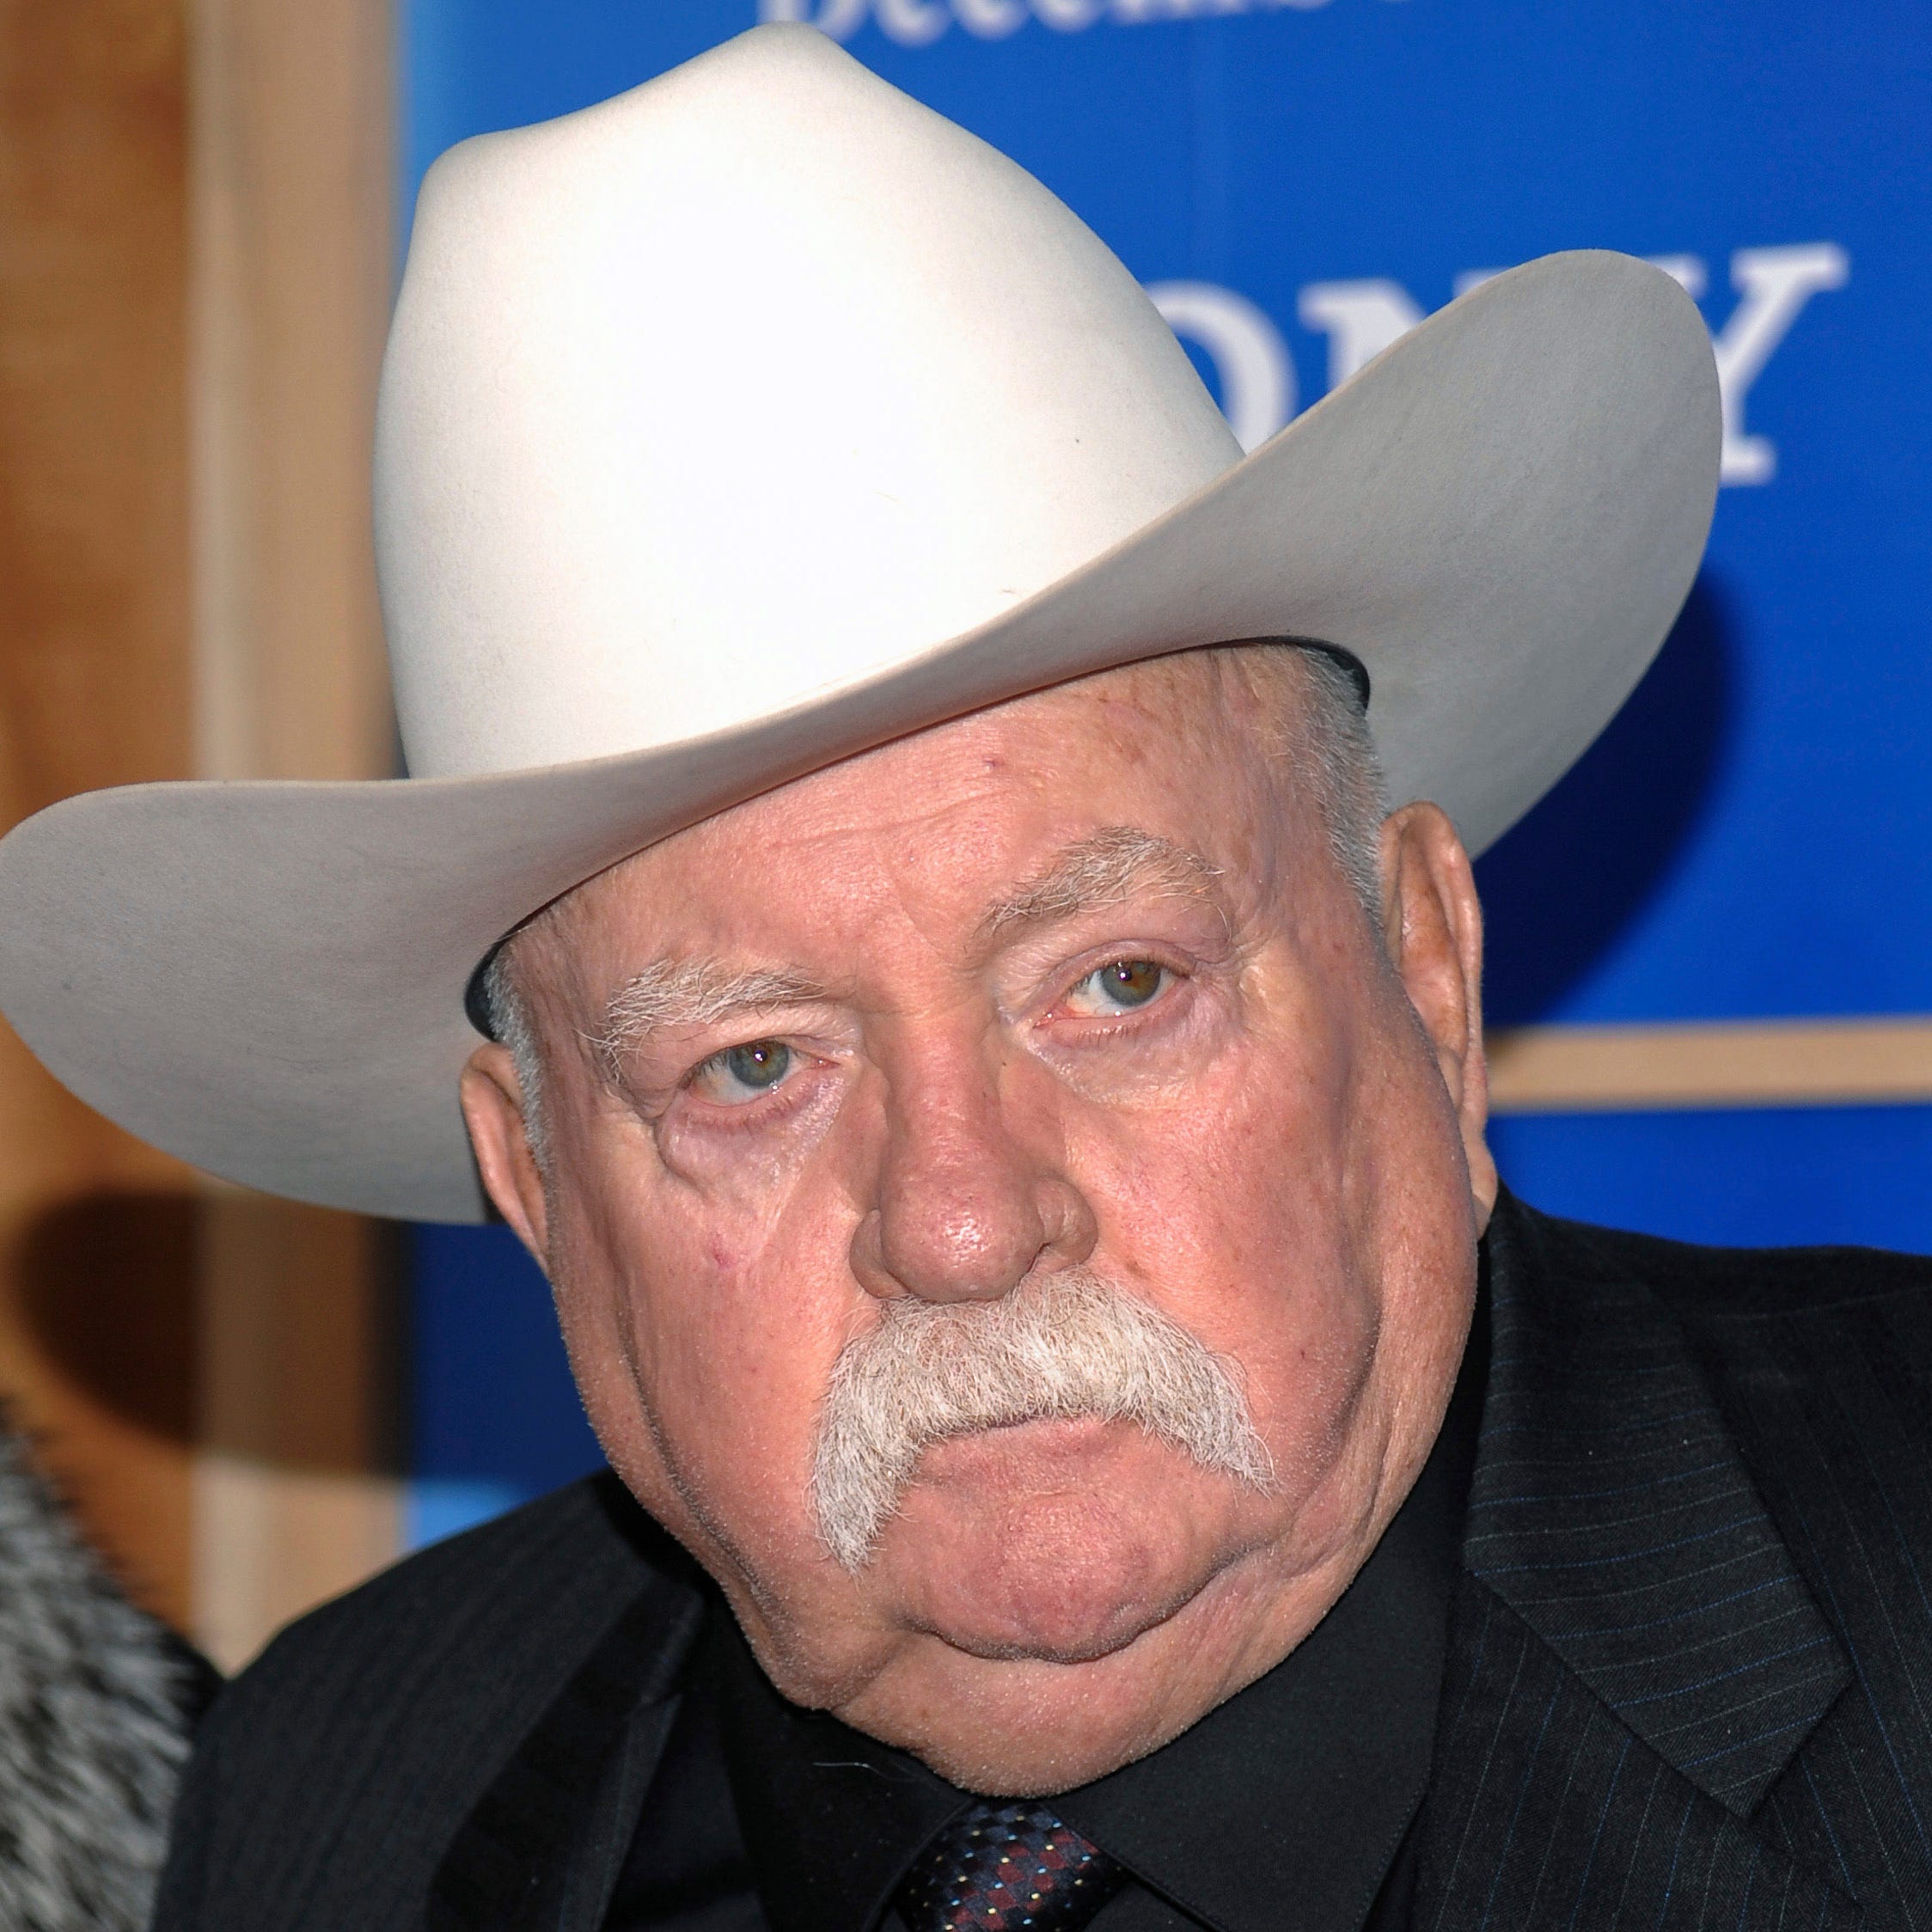 In this 2009 photo, Wilford Brimley attends the premiere of "Did You Hear About The Morgans" at the Ziegfeld Theater in New York.